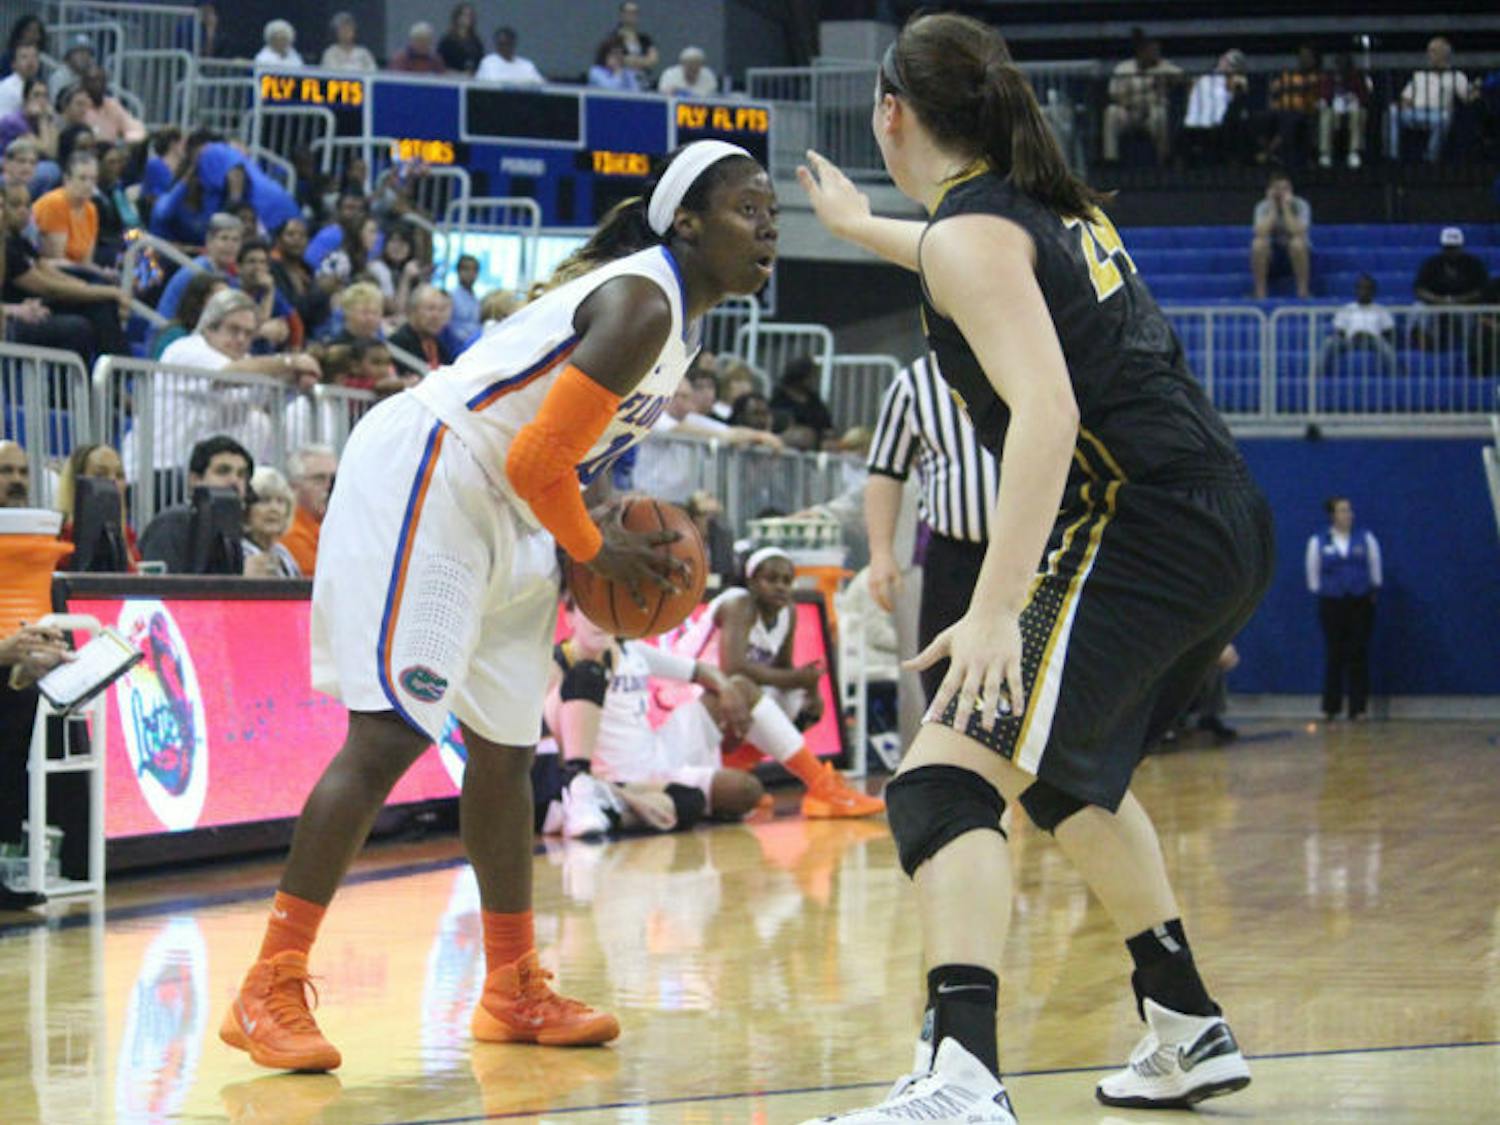 Jaterra Bonds looks to pass the ball during Florida’s 81-76 loss against Missouri on Feb. 20 in the O’Connell Center. UF will start the NCAA Tournament against Dayton on Sunday.